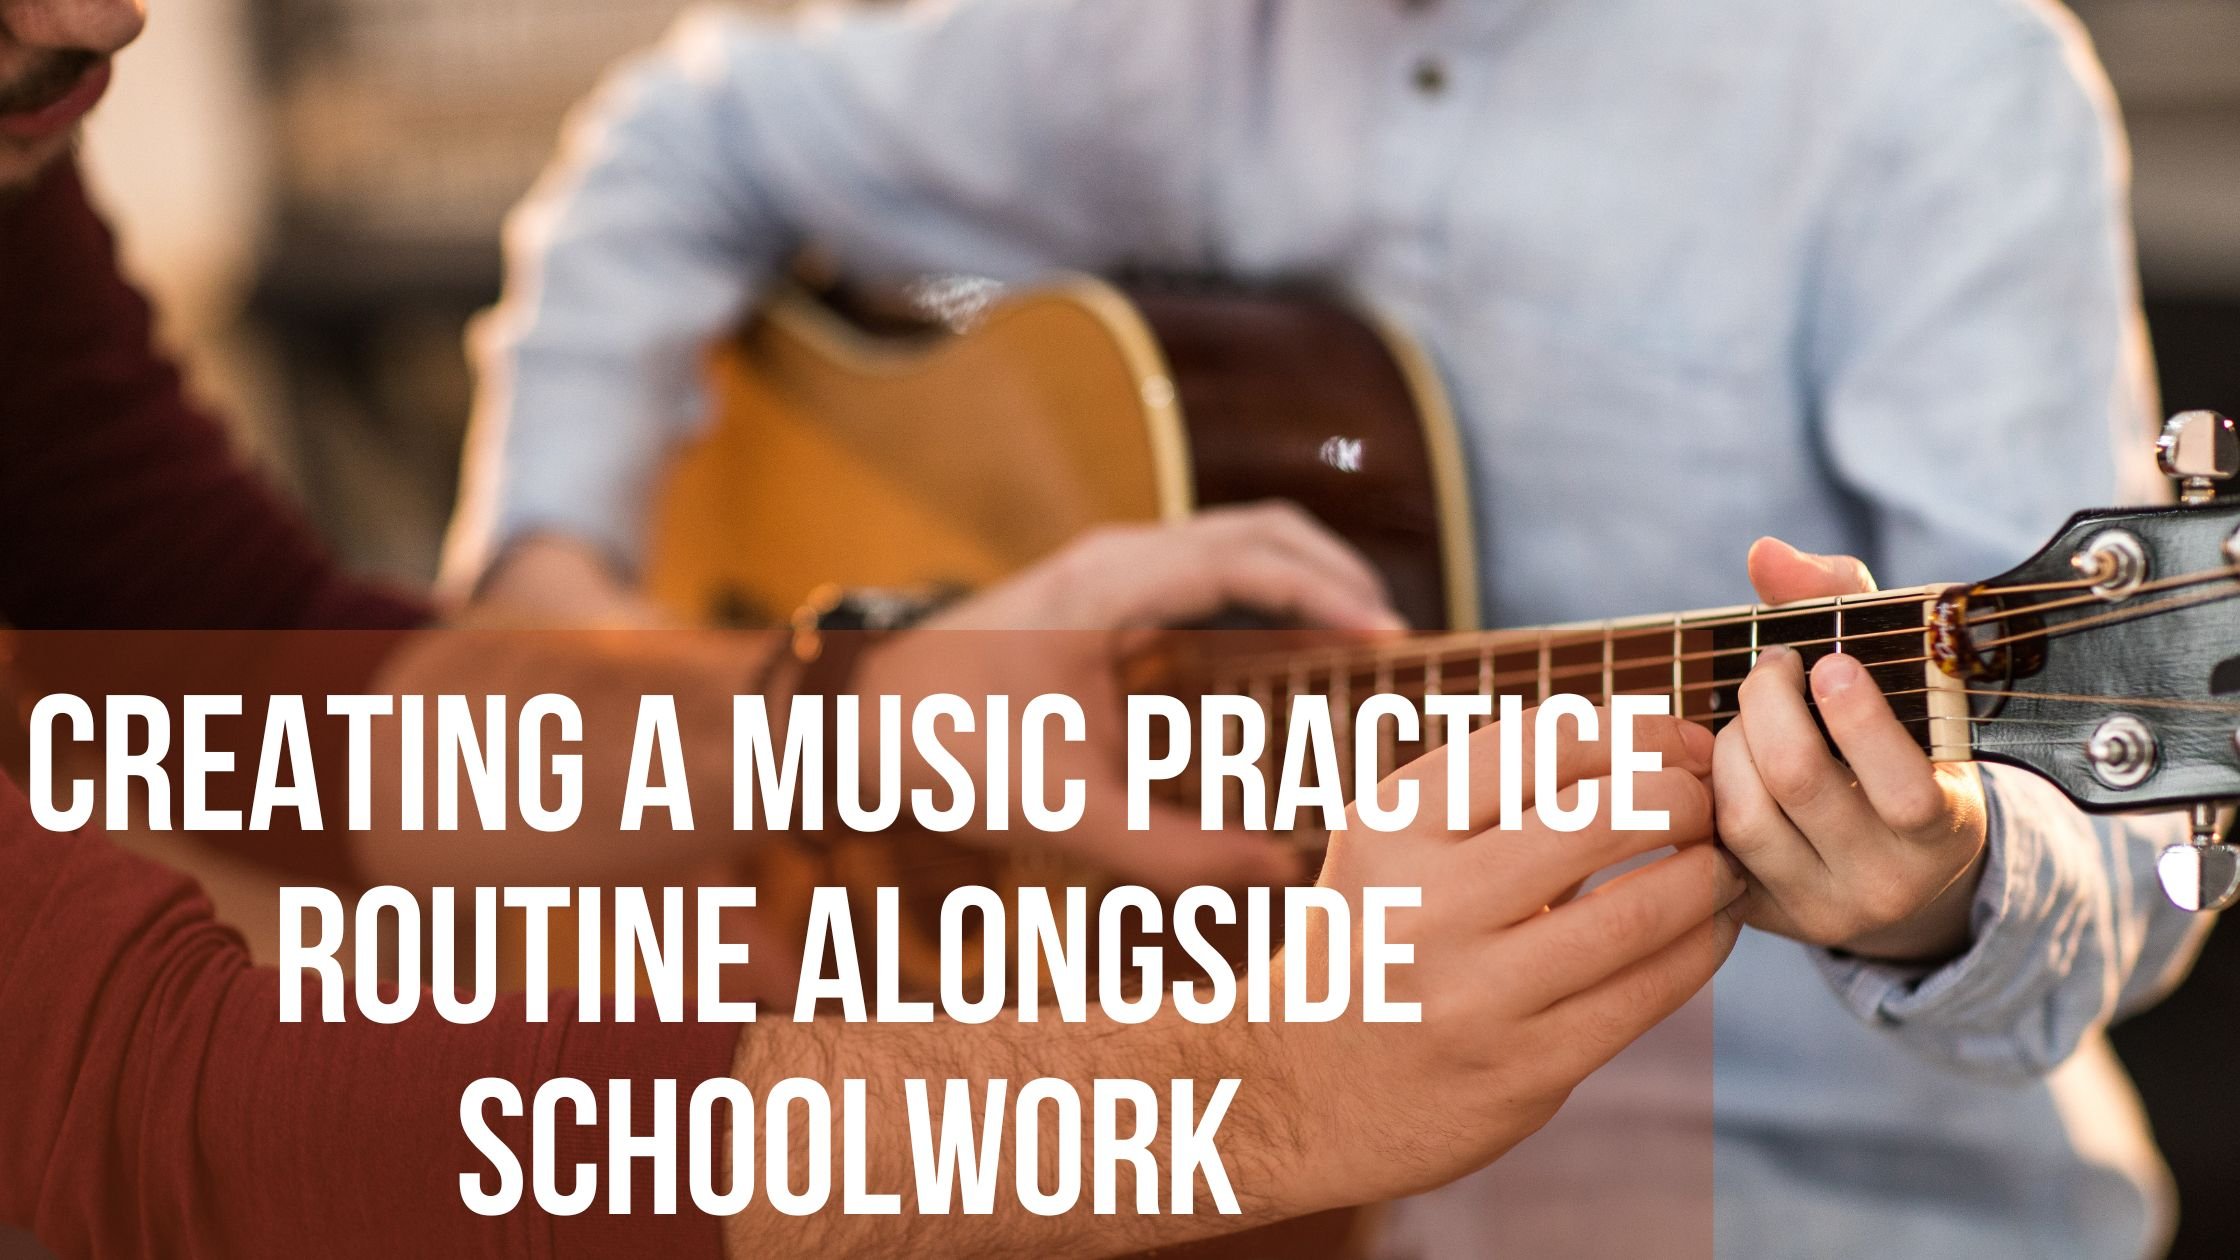 Creating a Music Practice Routine Alongside Schoolwork